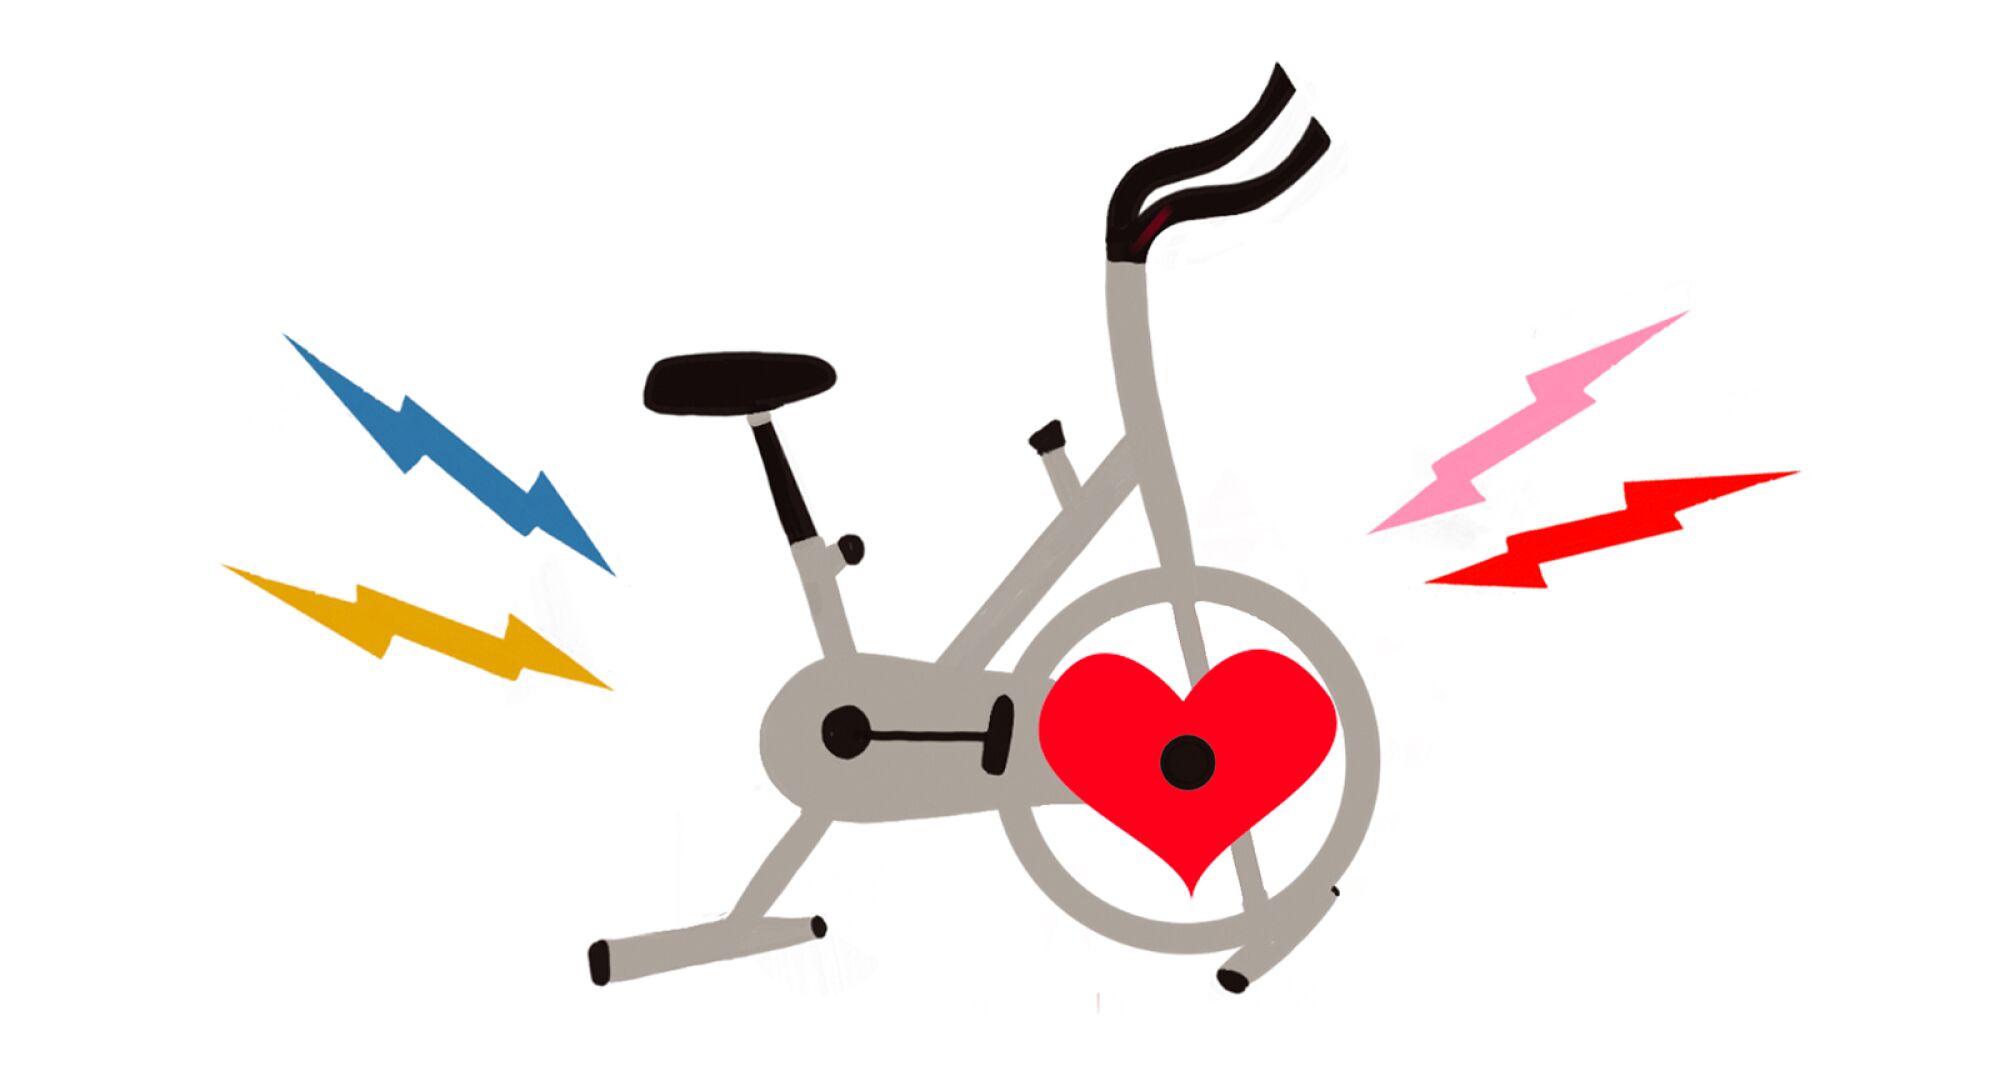 An exercise bike with a heart for a wheel with lightning bolts radiating from either side.